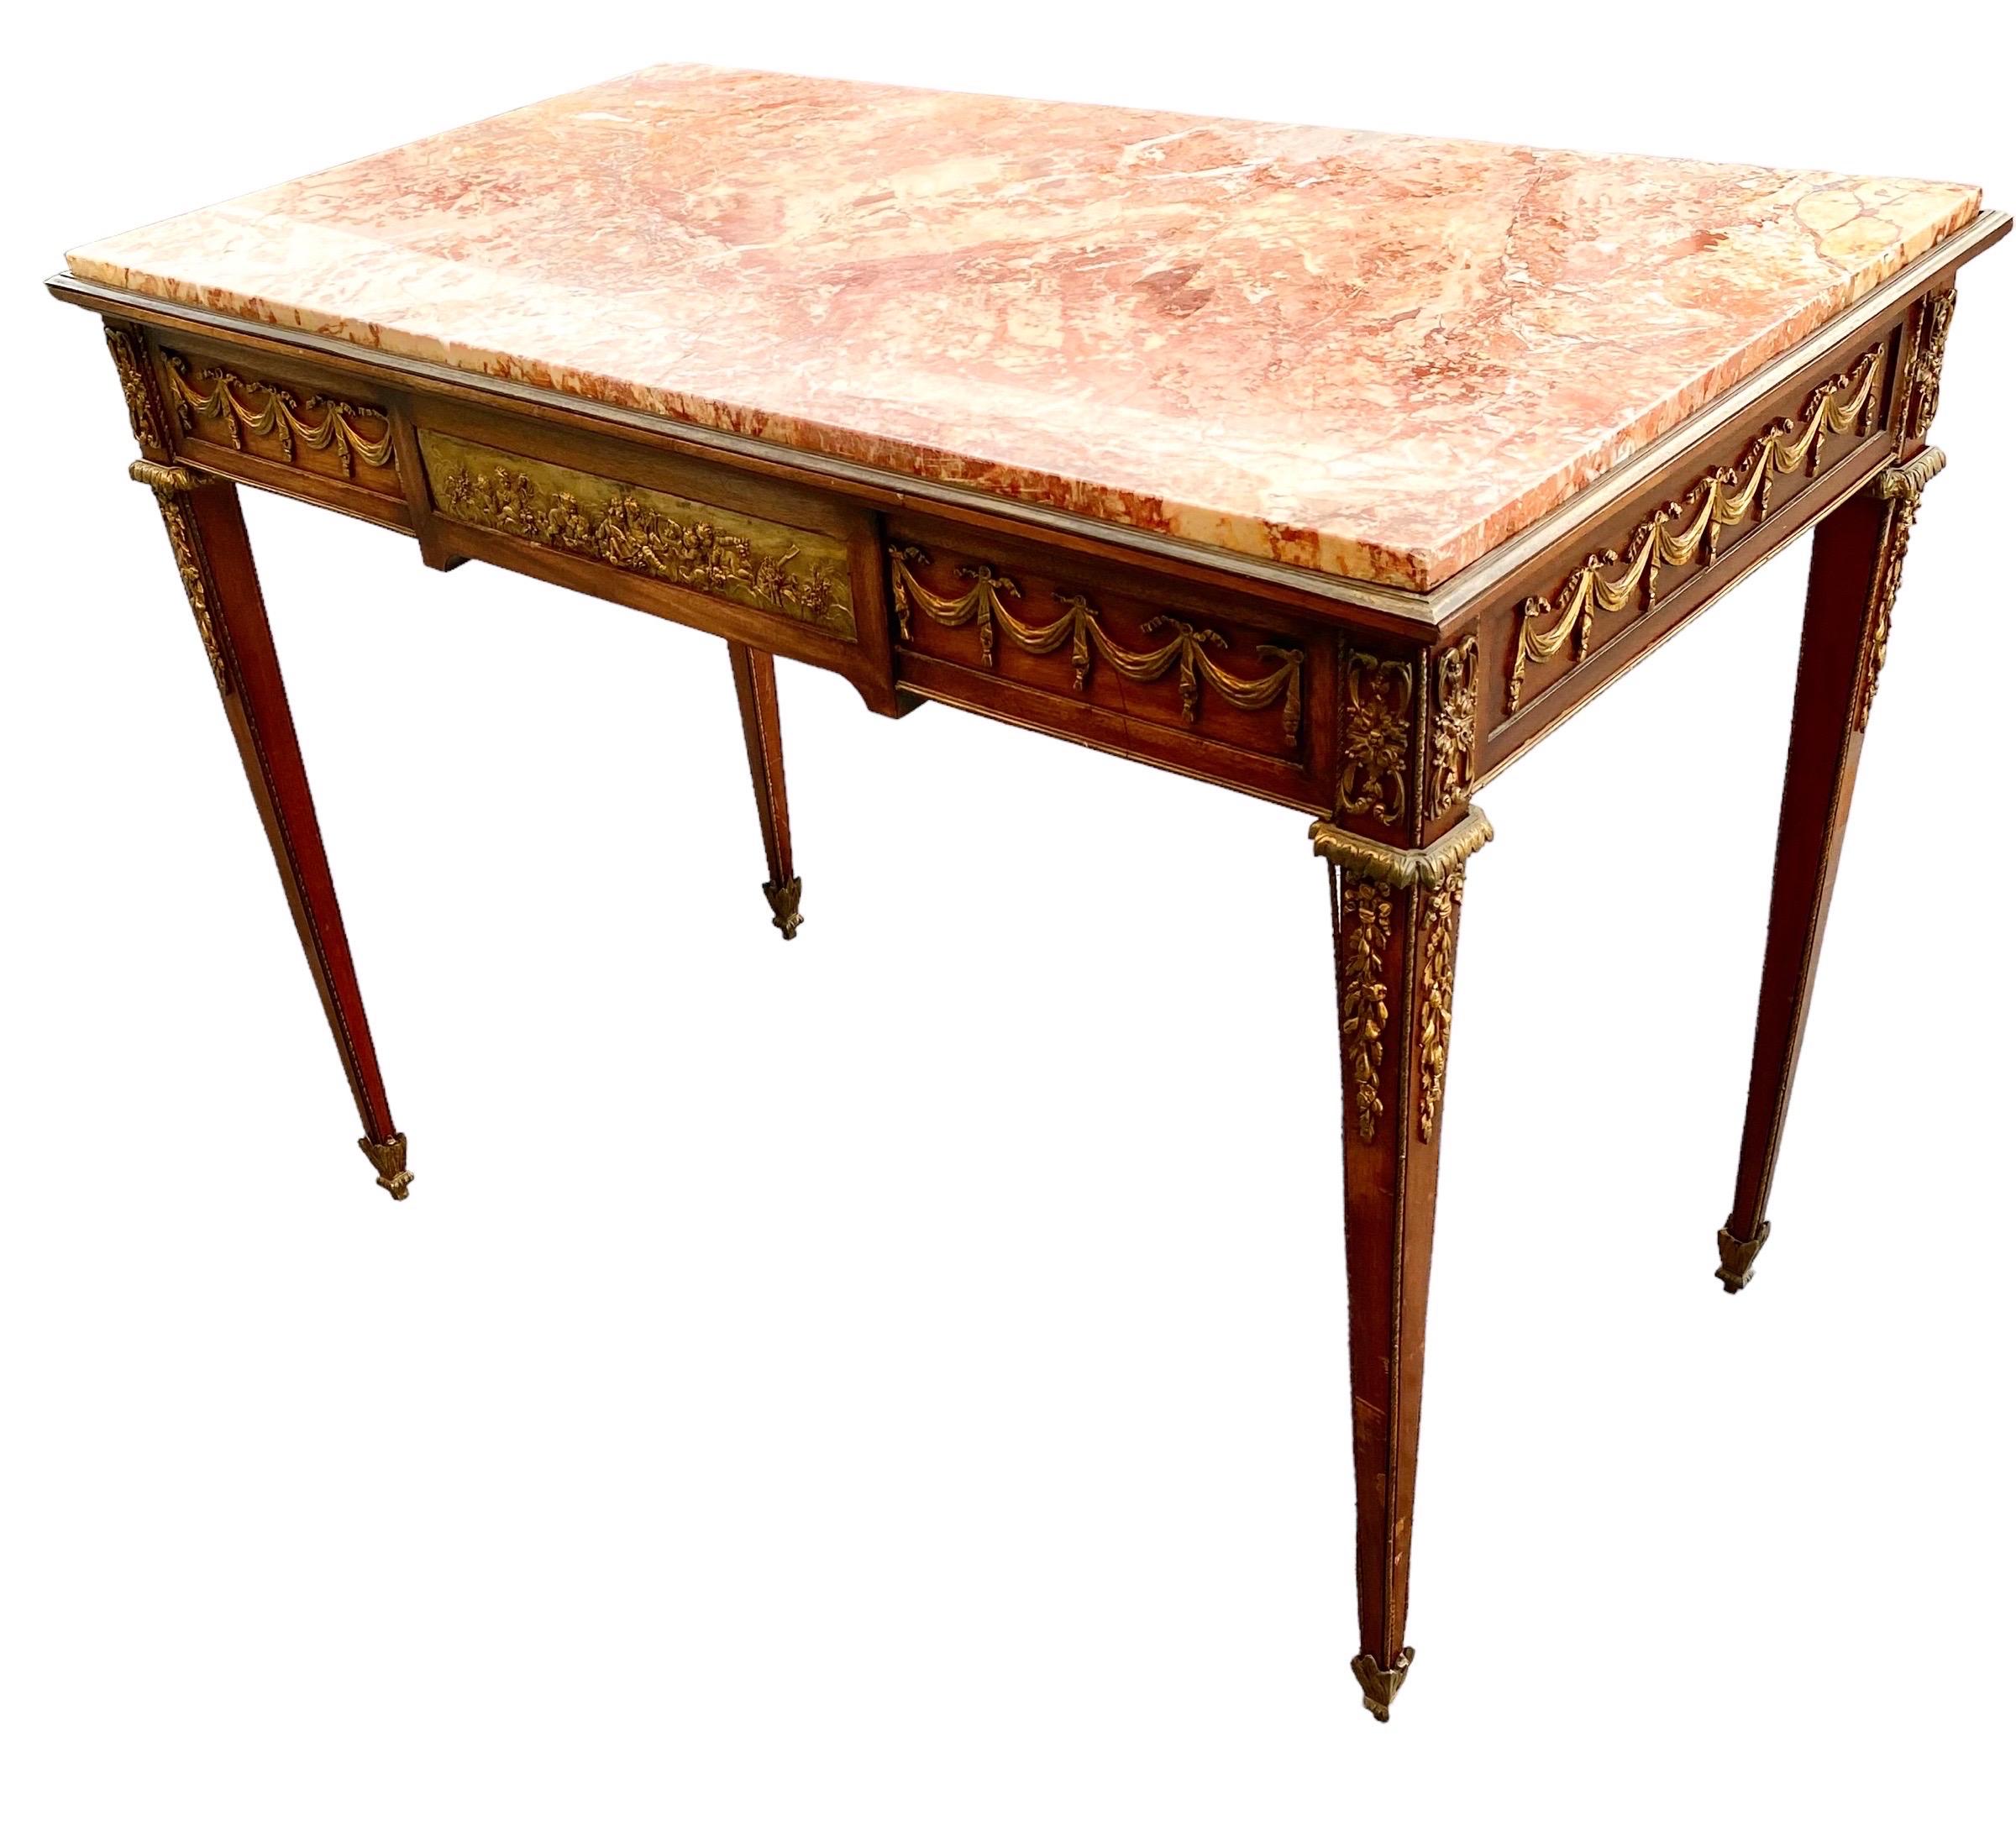 An elegant and very high quality French Early 20th century Louis XVI mahogany, ormolu, and Arabescato marble center/side, table/desk attributed to François Linke. The table is raised by circular tapered fluted legs with fine fitted foliate ormolu